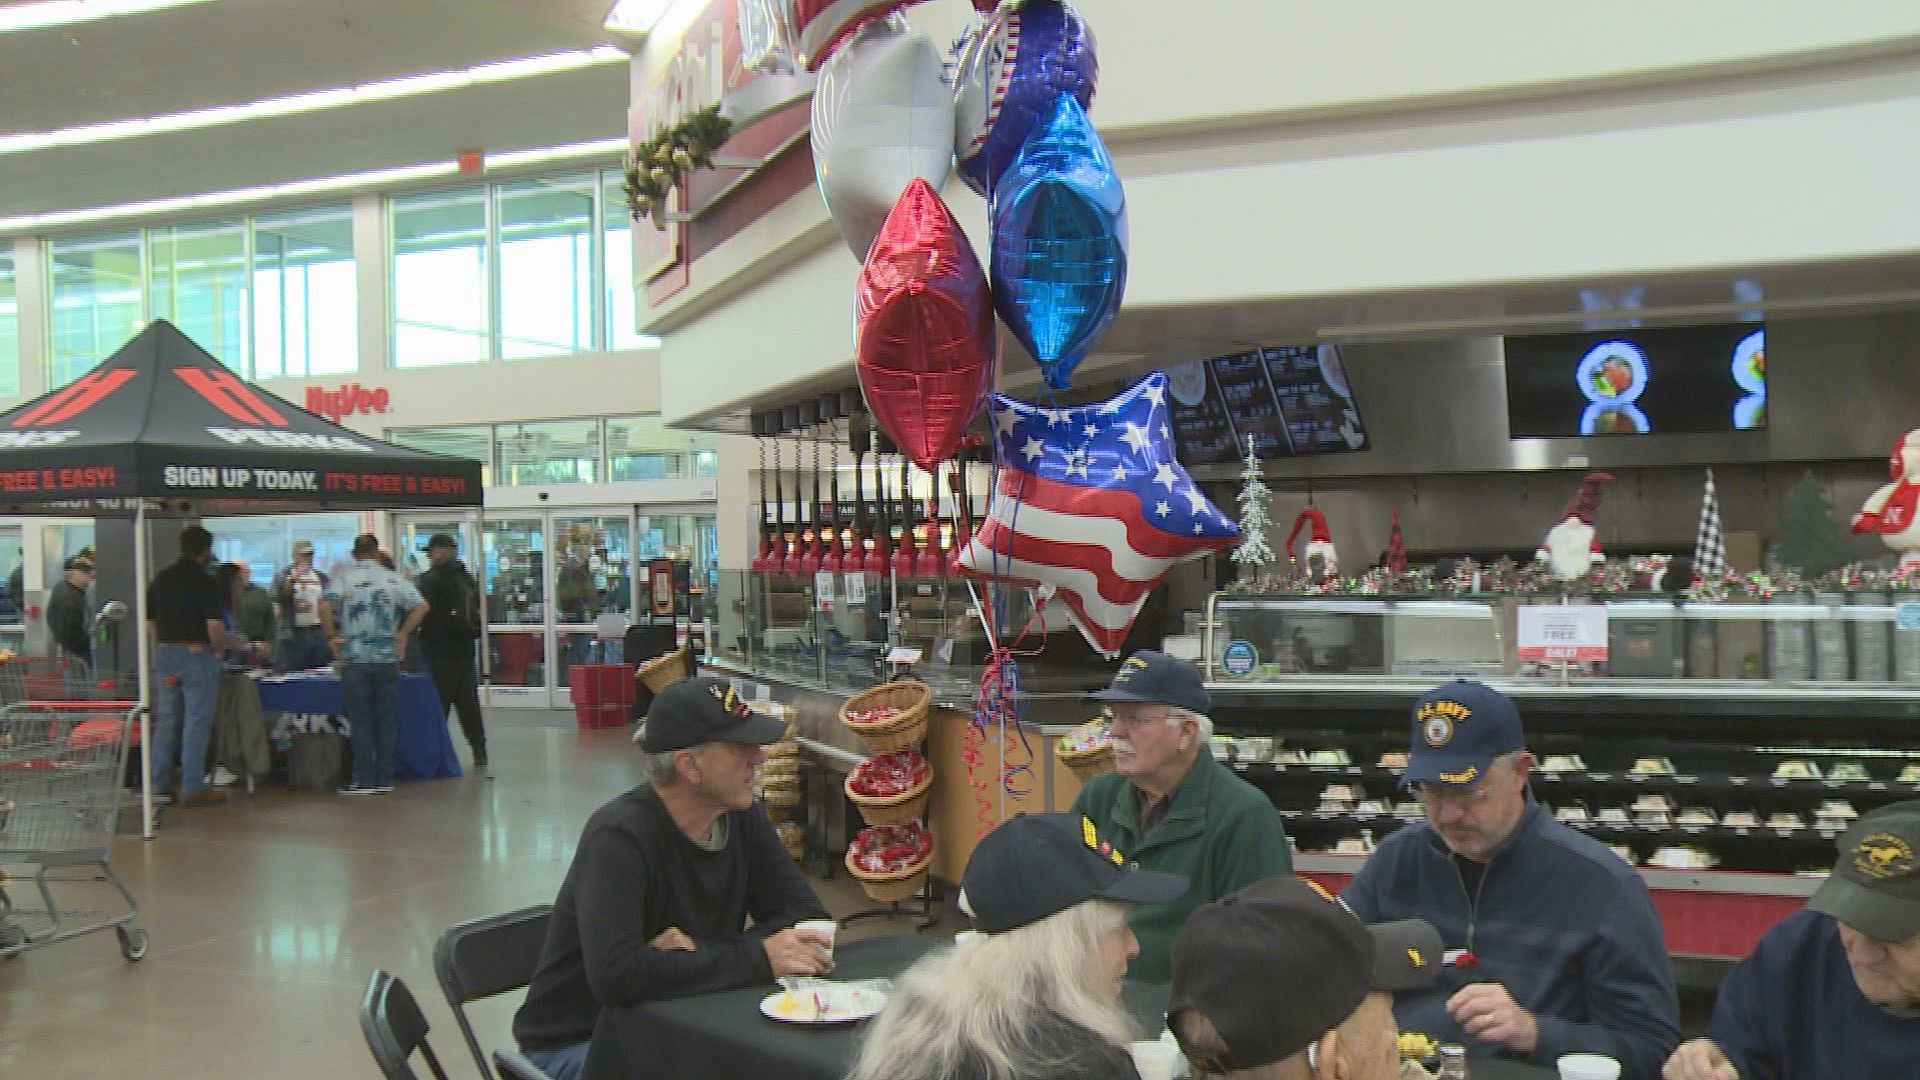 HyVee honors veterans in the Capital City with free breakfast